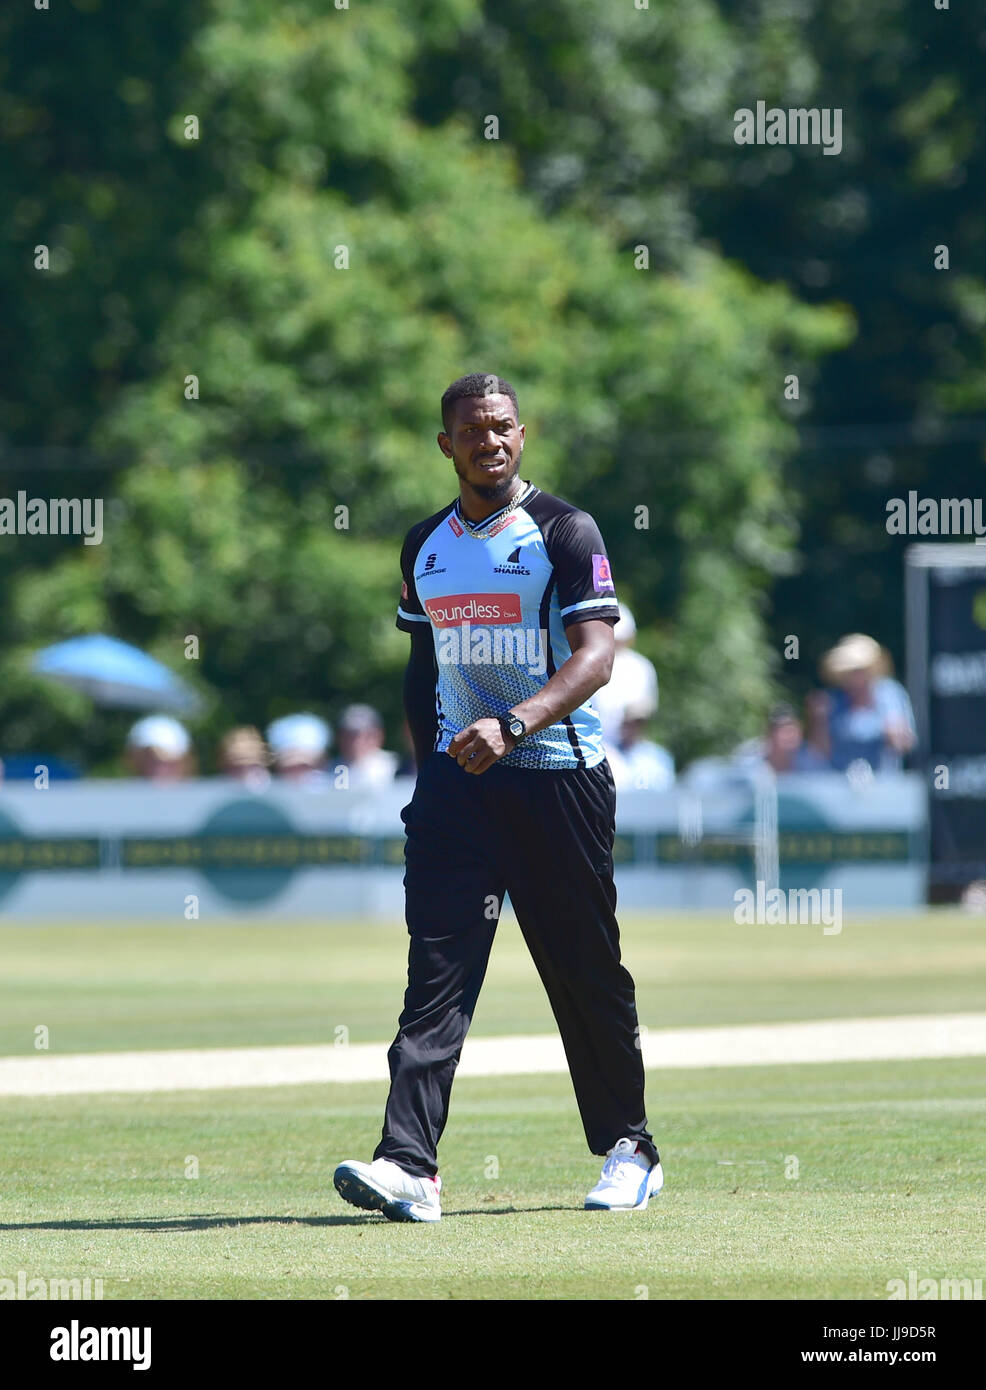 Chris Jordan of Sussex Sharks v Glamorgan in the NatWest T20 blast match at the Arundel Castle ground in West Sussex UK Sunday 9th July 2017  Photograph taken by Simon Dack Stock Photo